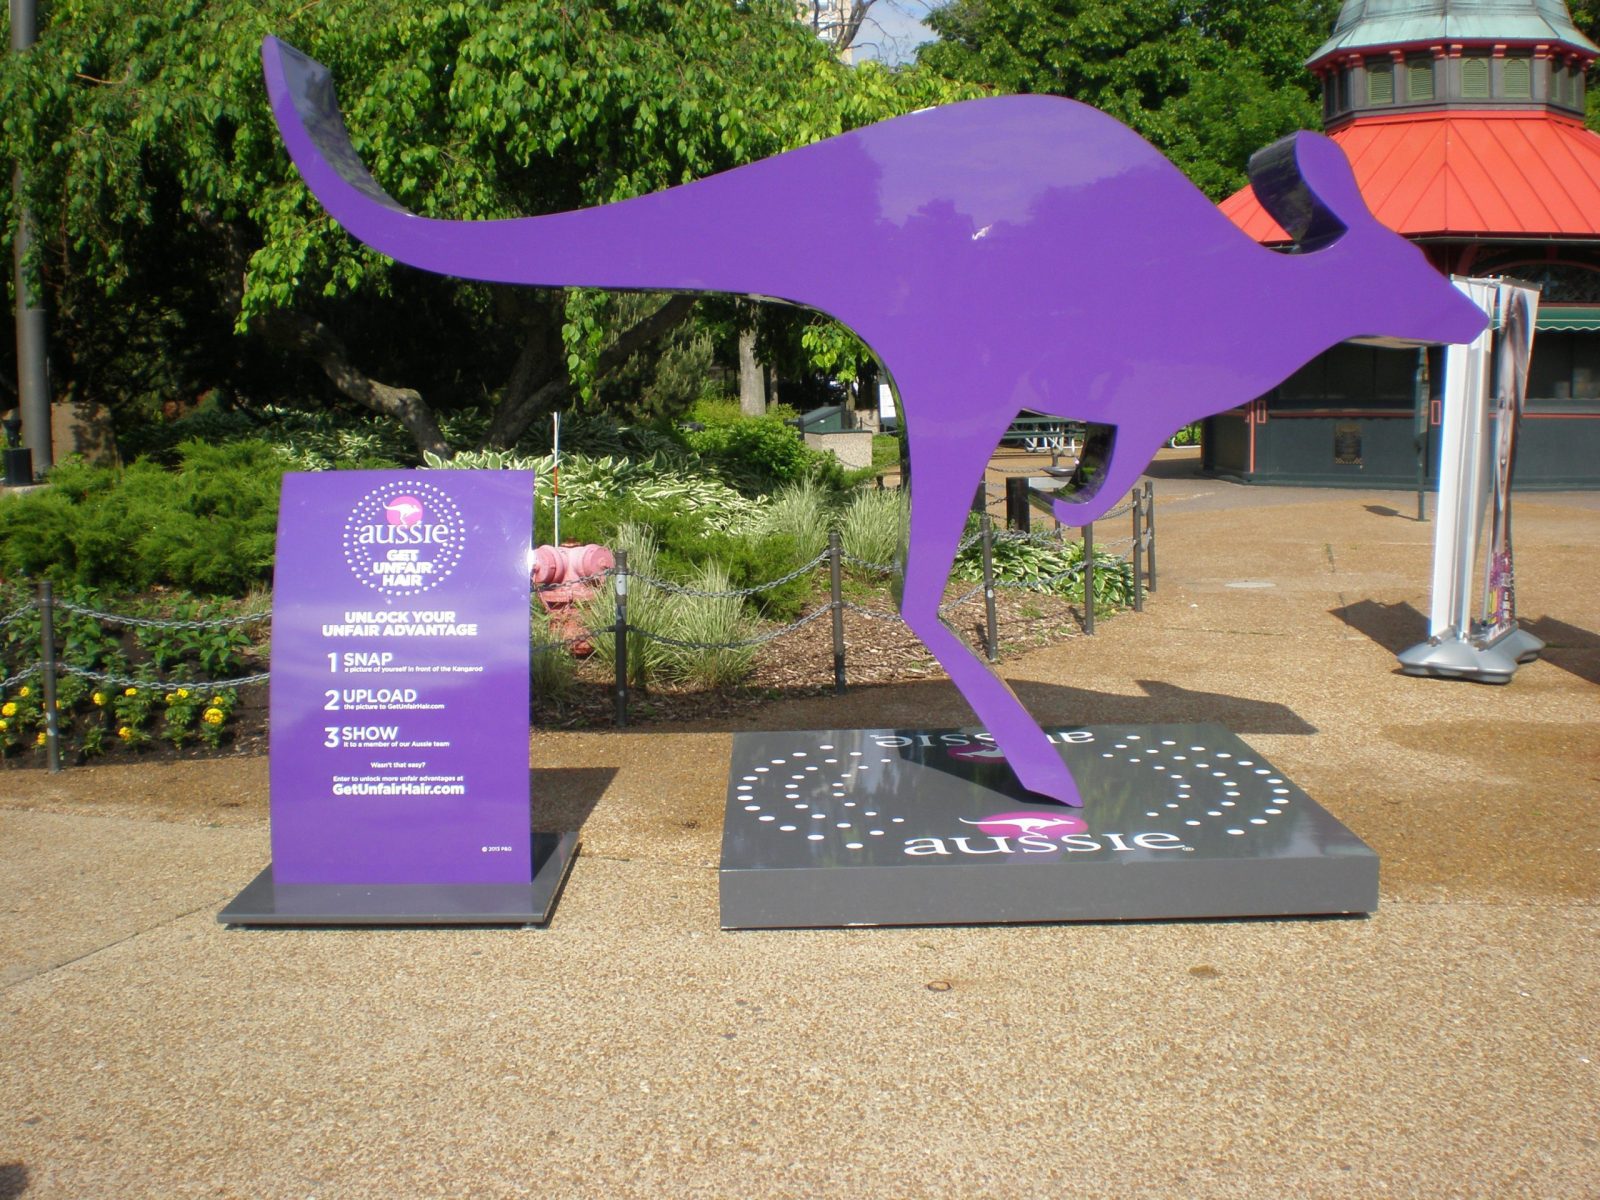 A big purple sign in a shape of a kangaroo and a smaller purple sign next to with instructions, representing how one can benefit from calling a Chicago sign company.